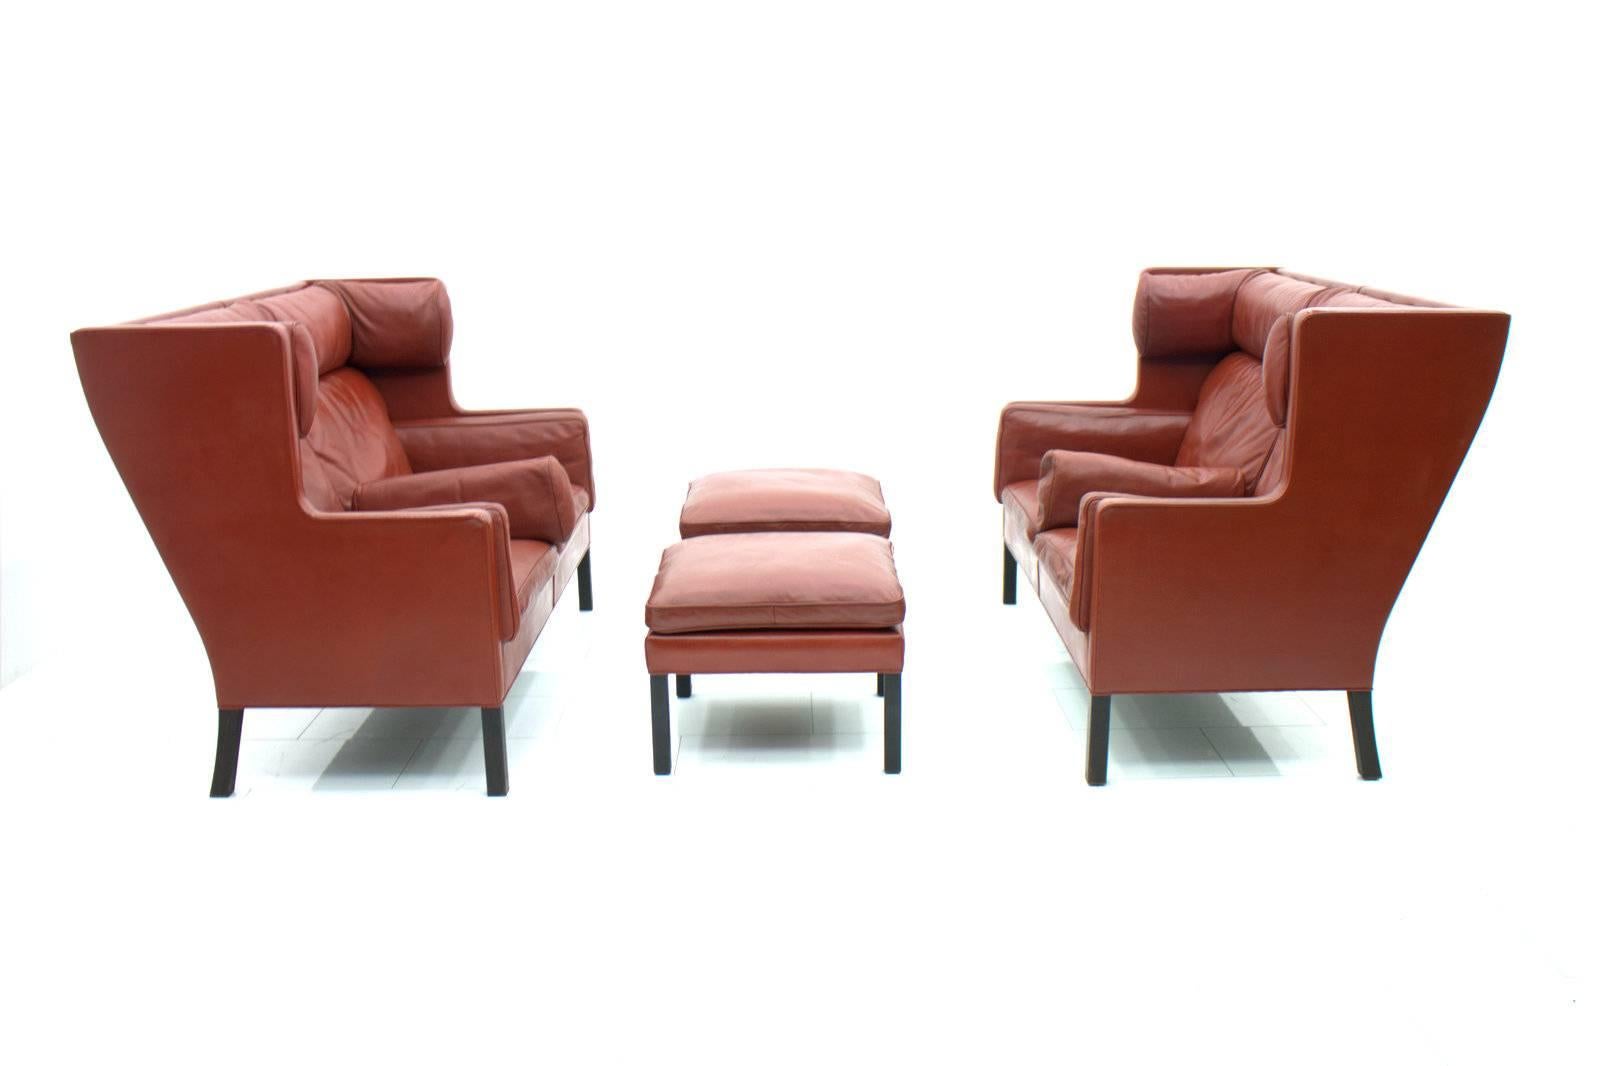 One of Two Børge Mogensen Coupe Leather Sofa, 2192, Frederica, Denmark 1971 1